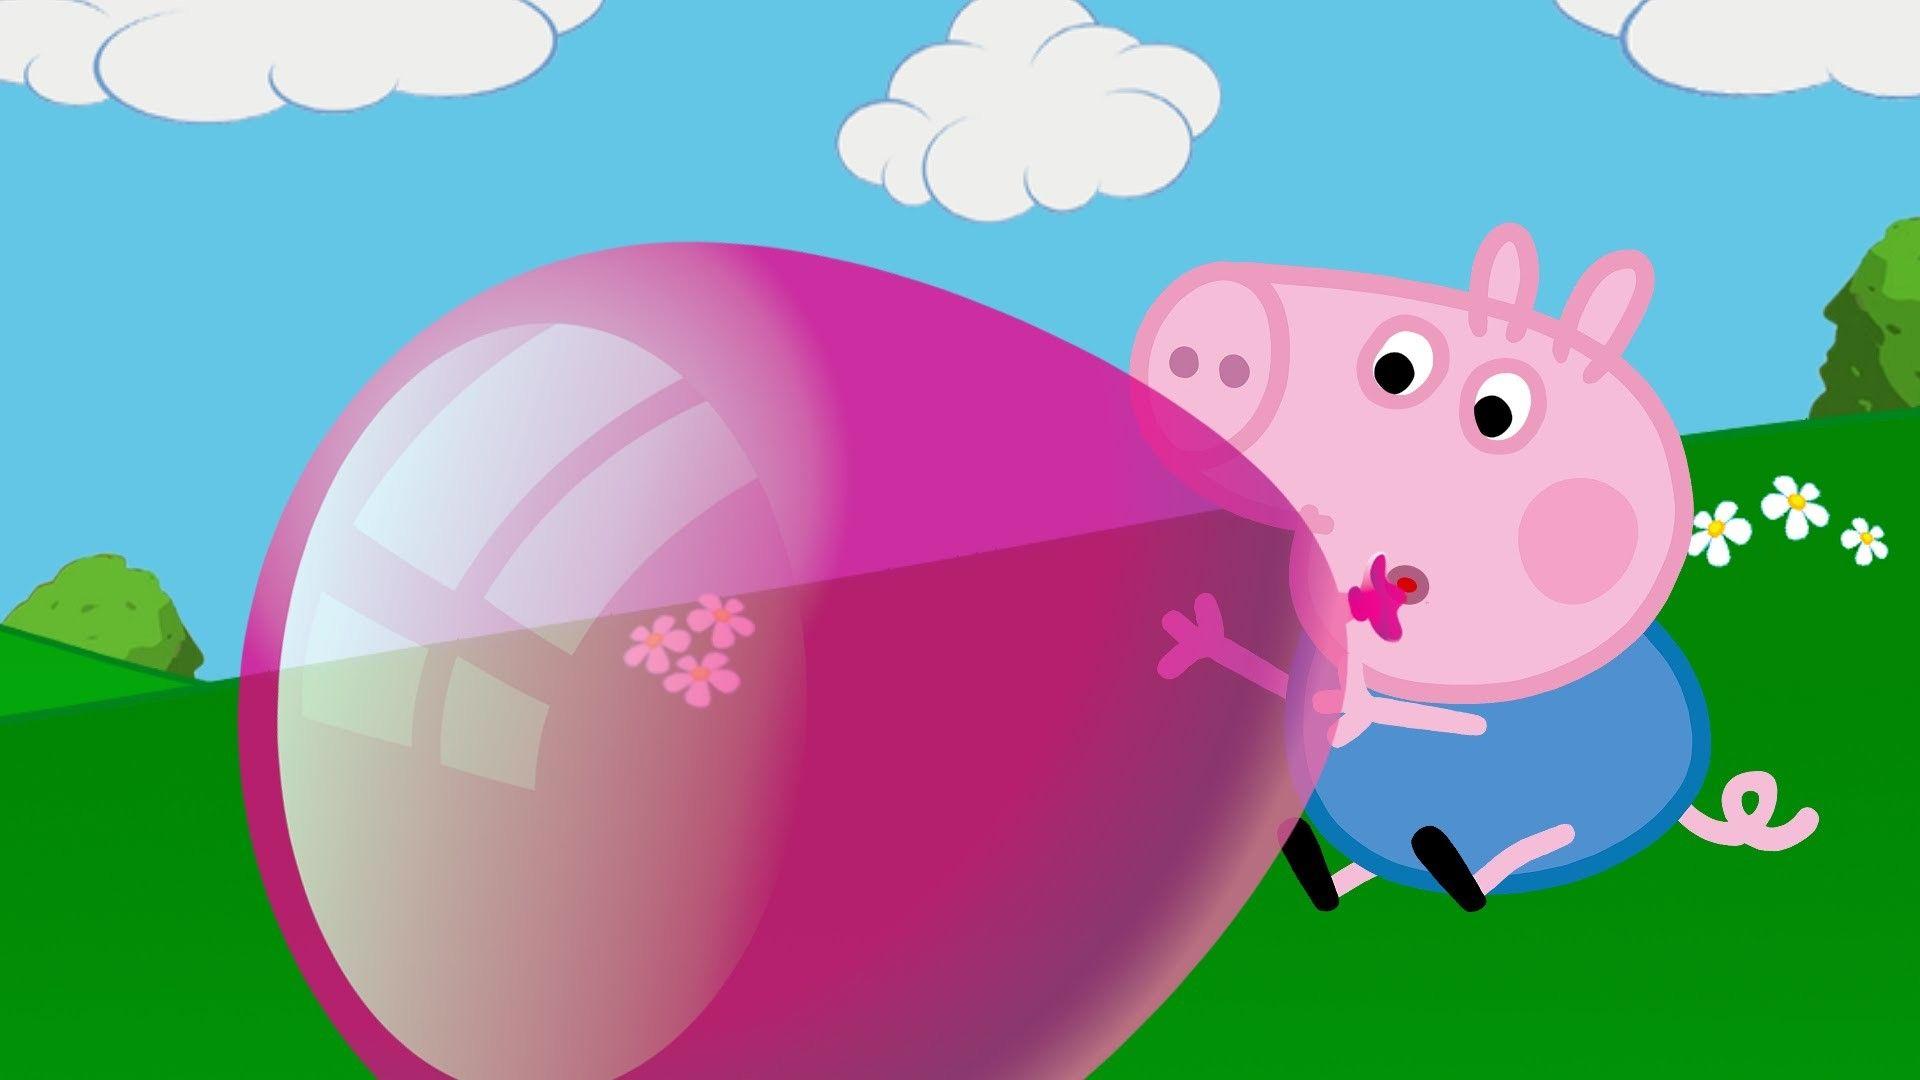 Peppa Pig Crying Wallpapers - Wallpaper Cave.